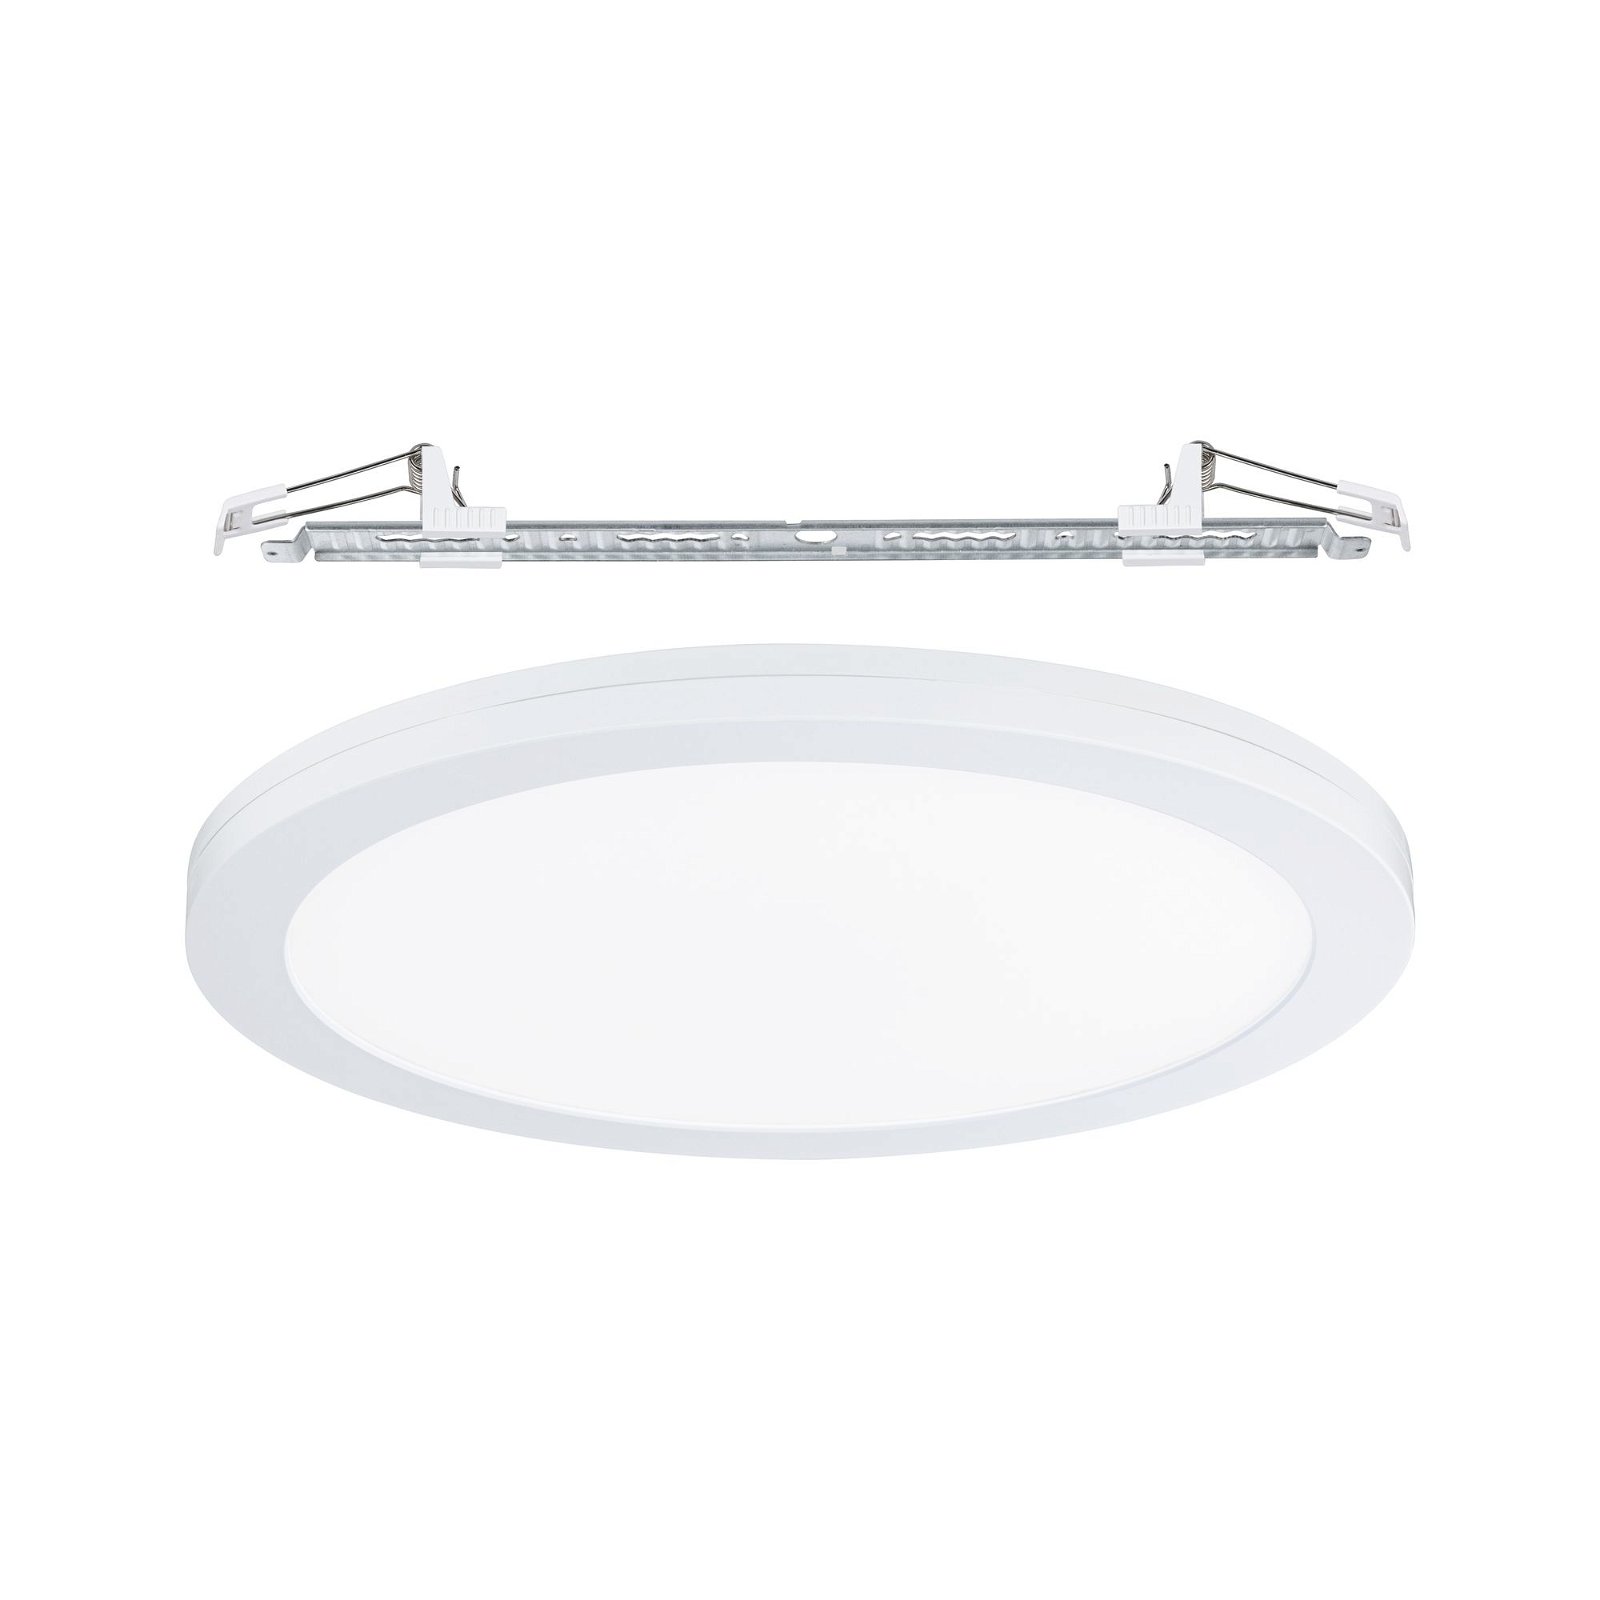 LED-inbouwpaneel 2in1 Cover-it rond 330mm 1700lm 4000K Wit mat